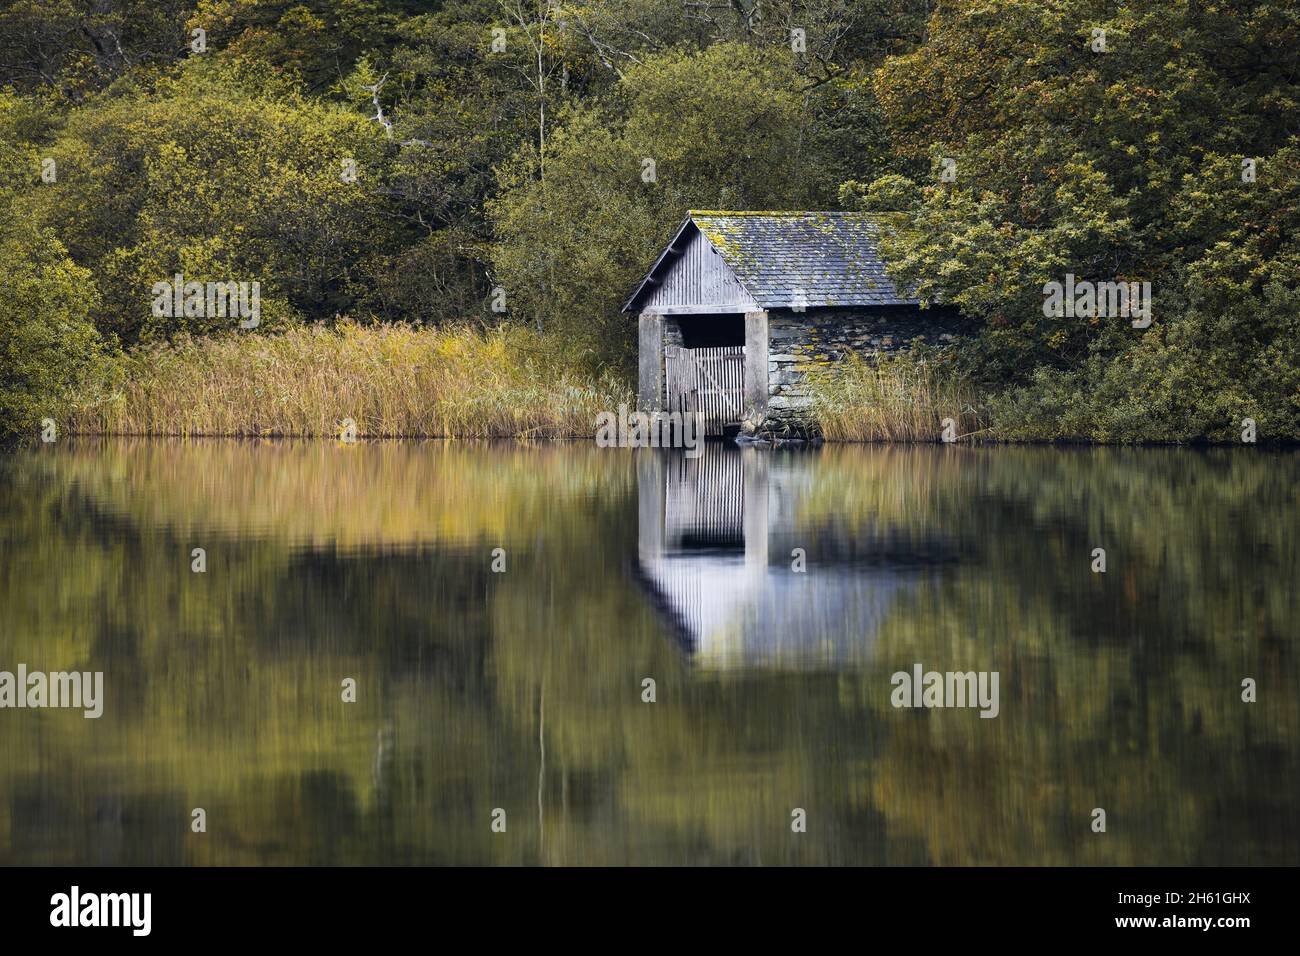 Looking across the calm vista towards the old boathouse which resides on the banks of Rydal Water in the Lake District, autumn just around the corner. Stock Photo